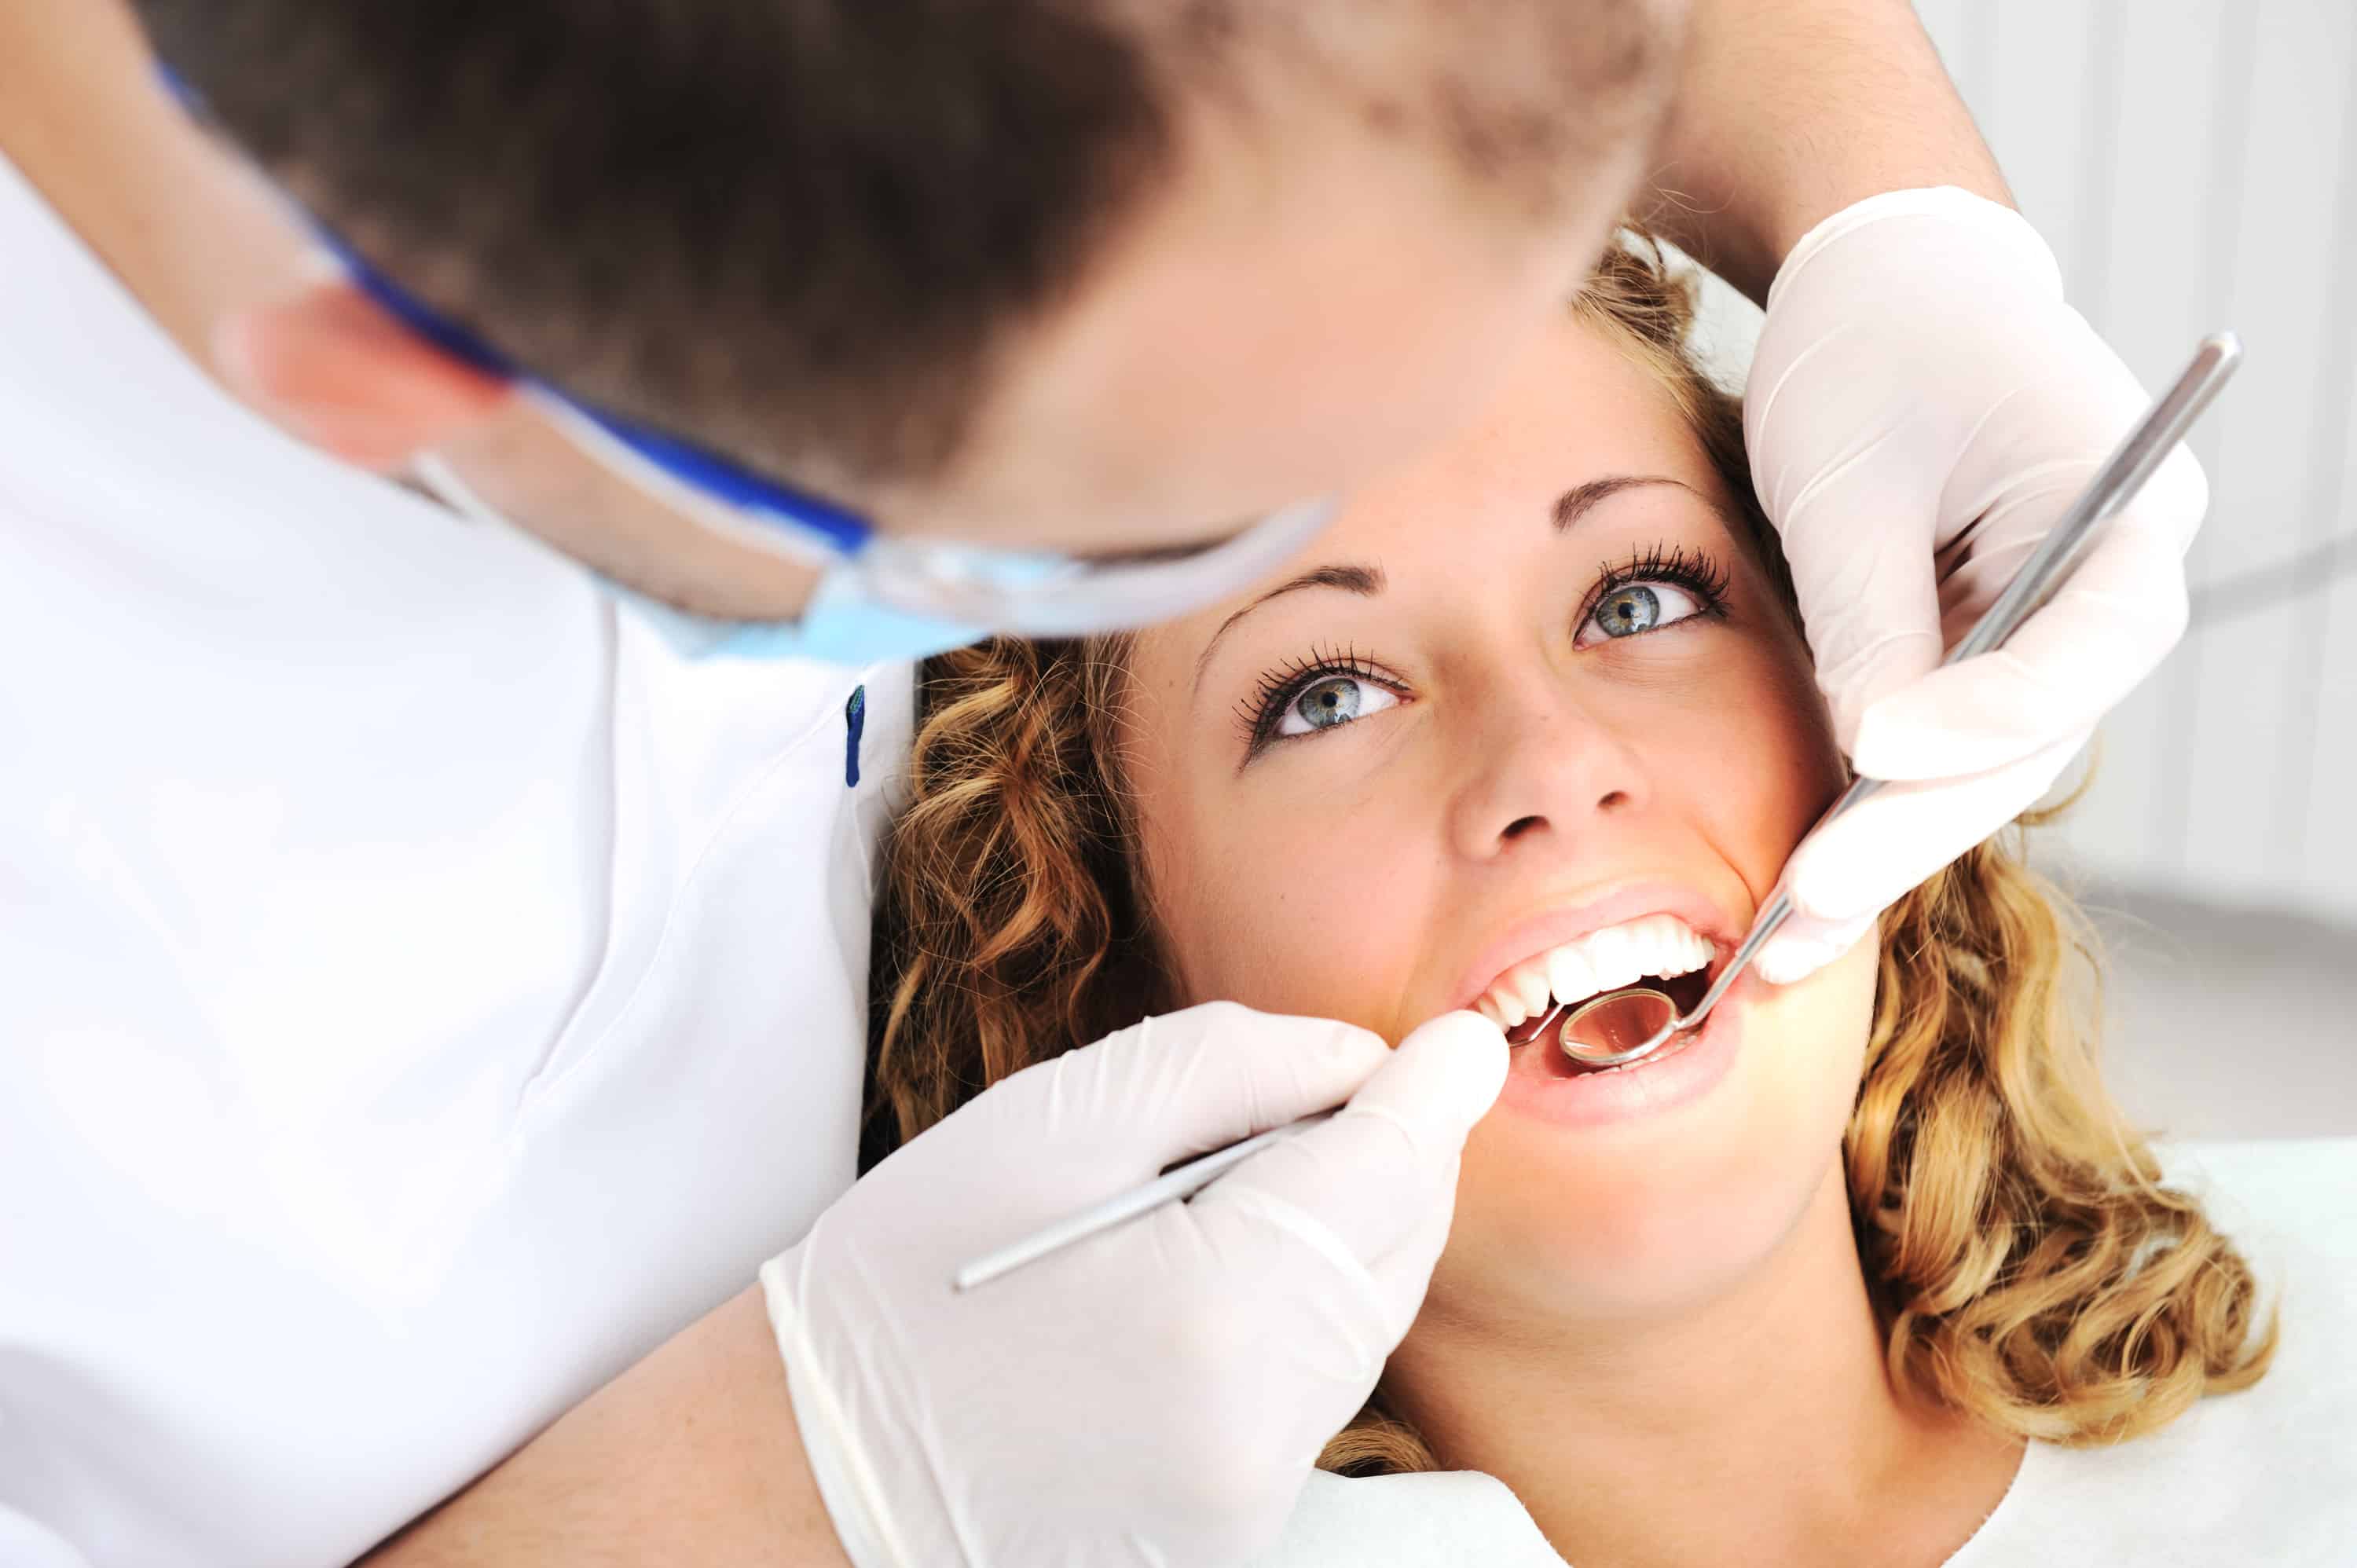 5 key factors to consider when choosing a family dentist